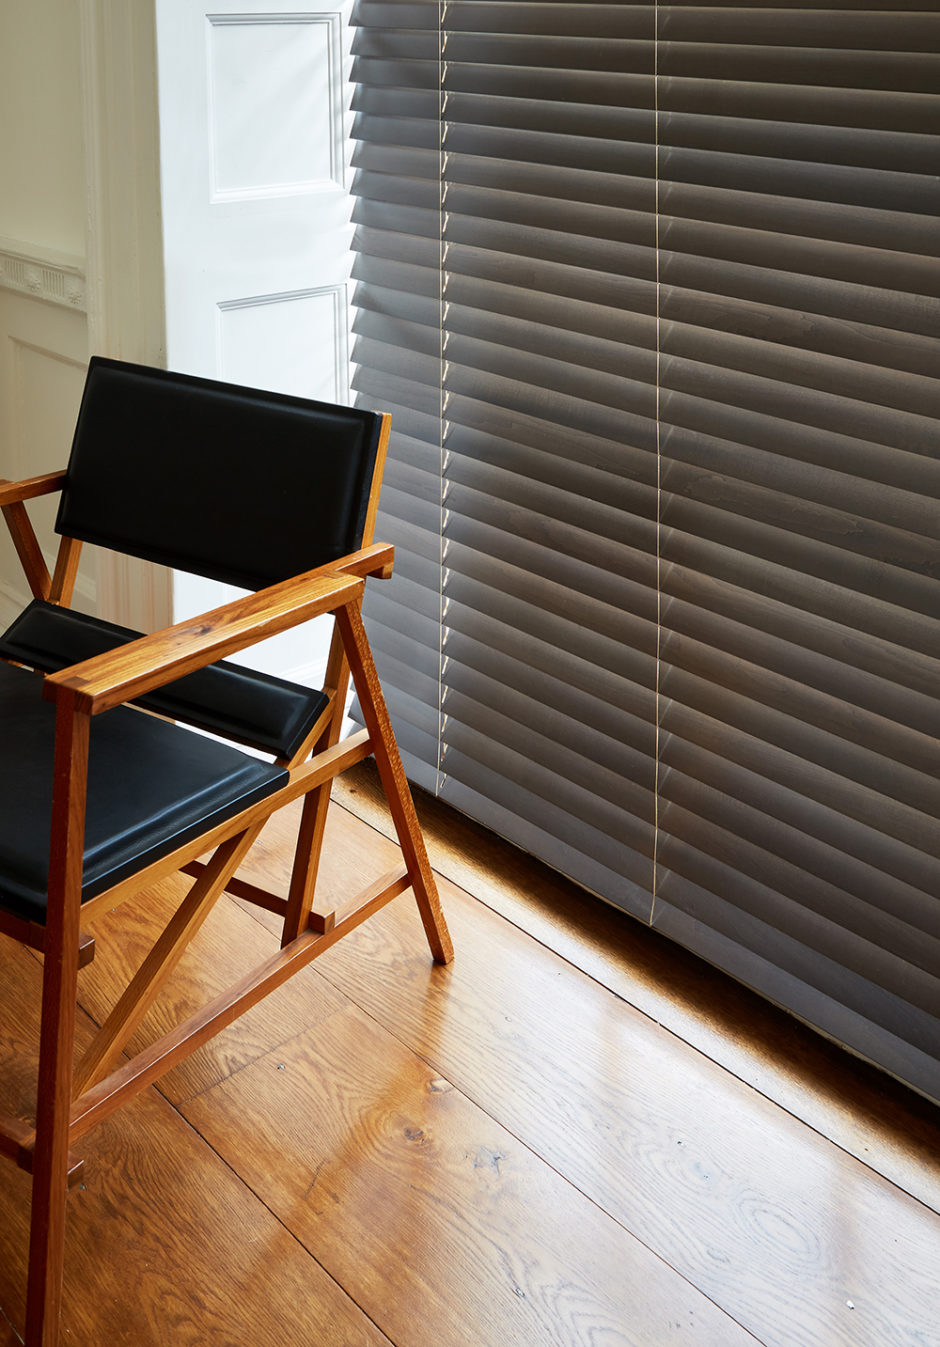 Wooden Blinds For Patio Doors, Do Perfect Fit Blinds Work On Sliding Patio Doors